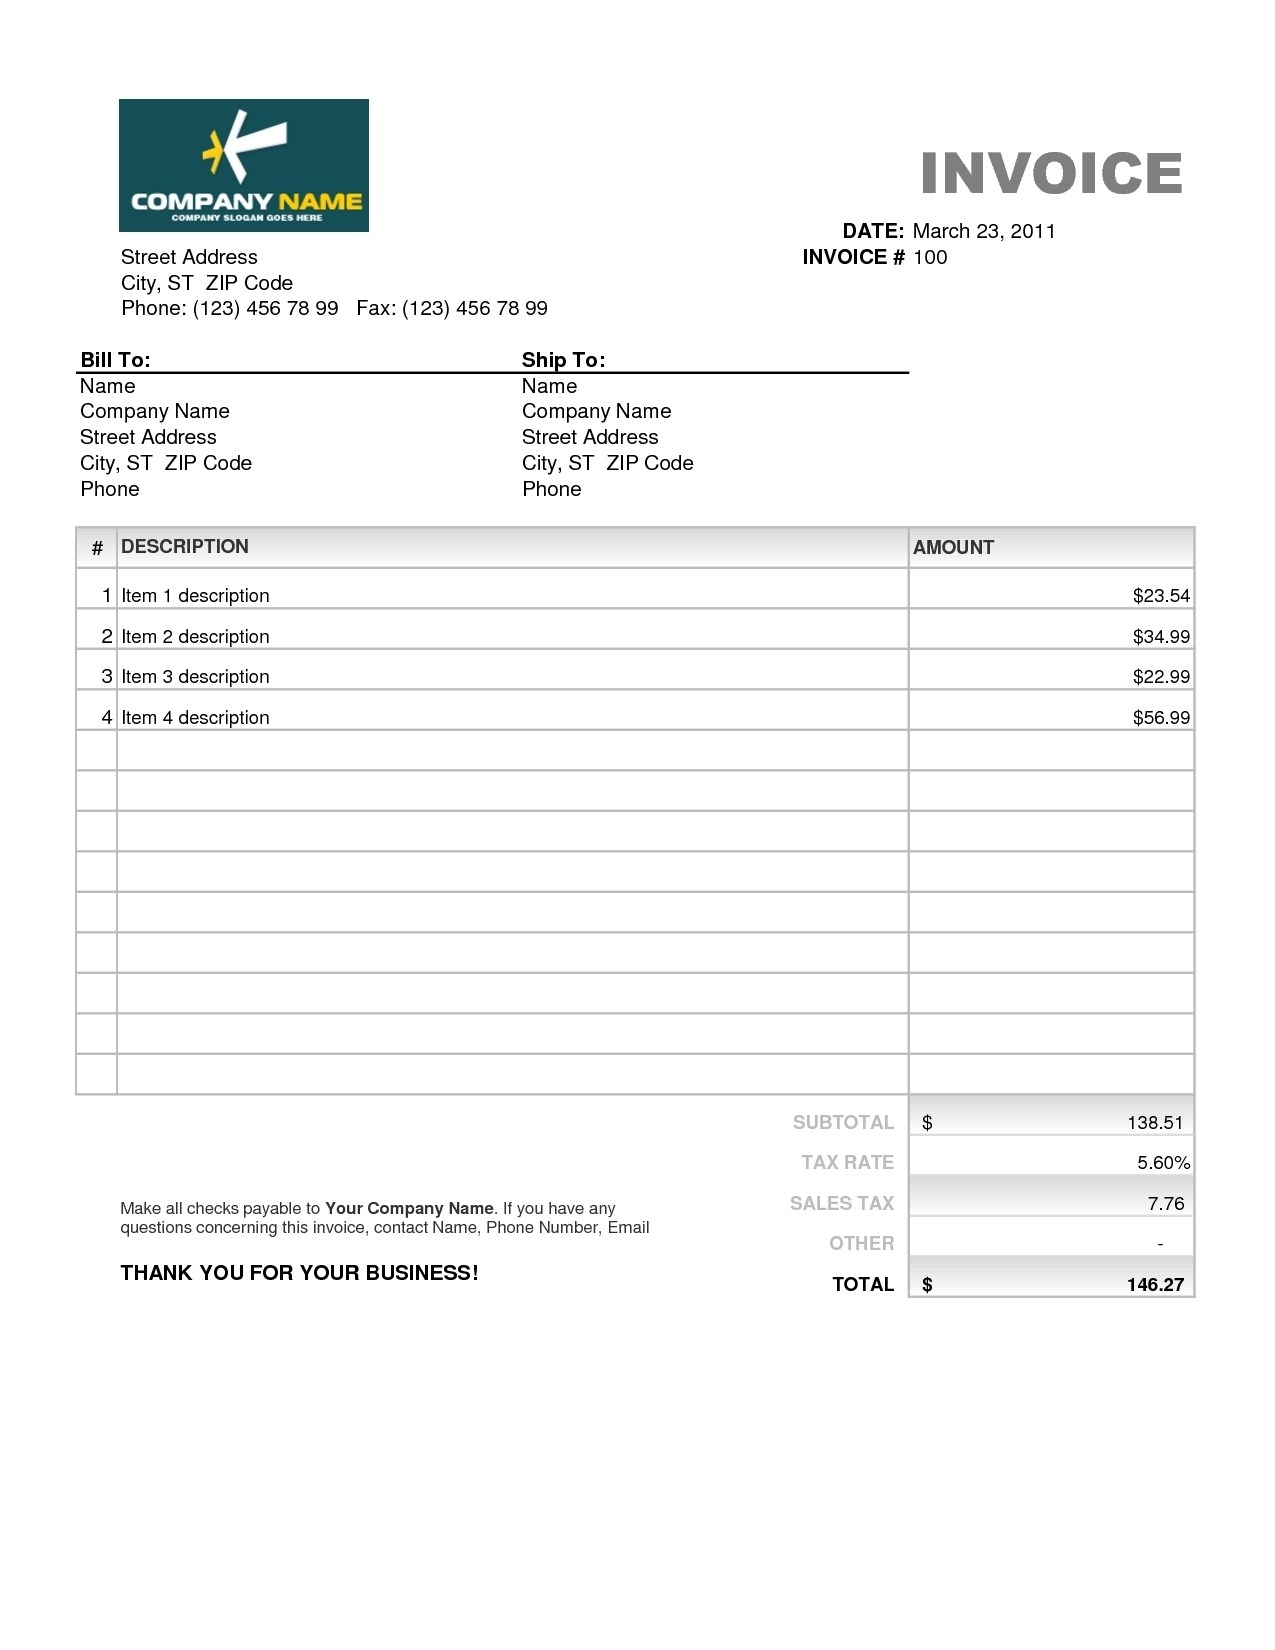 pages invoice templates invoice template for pages free iwork pages invoice templates free